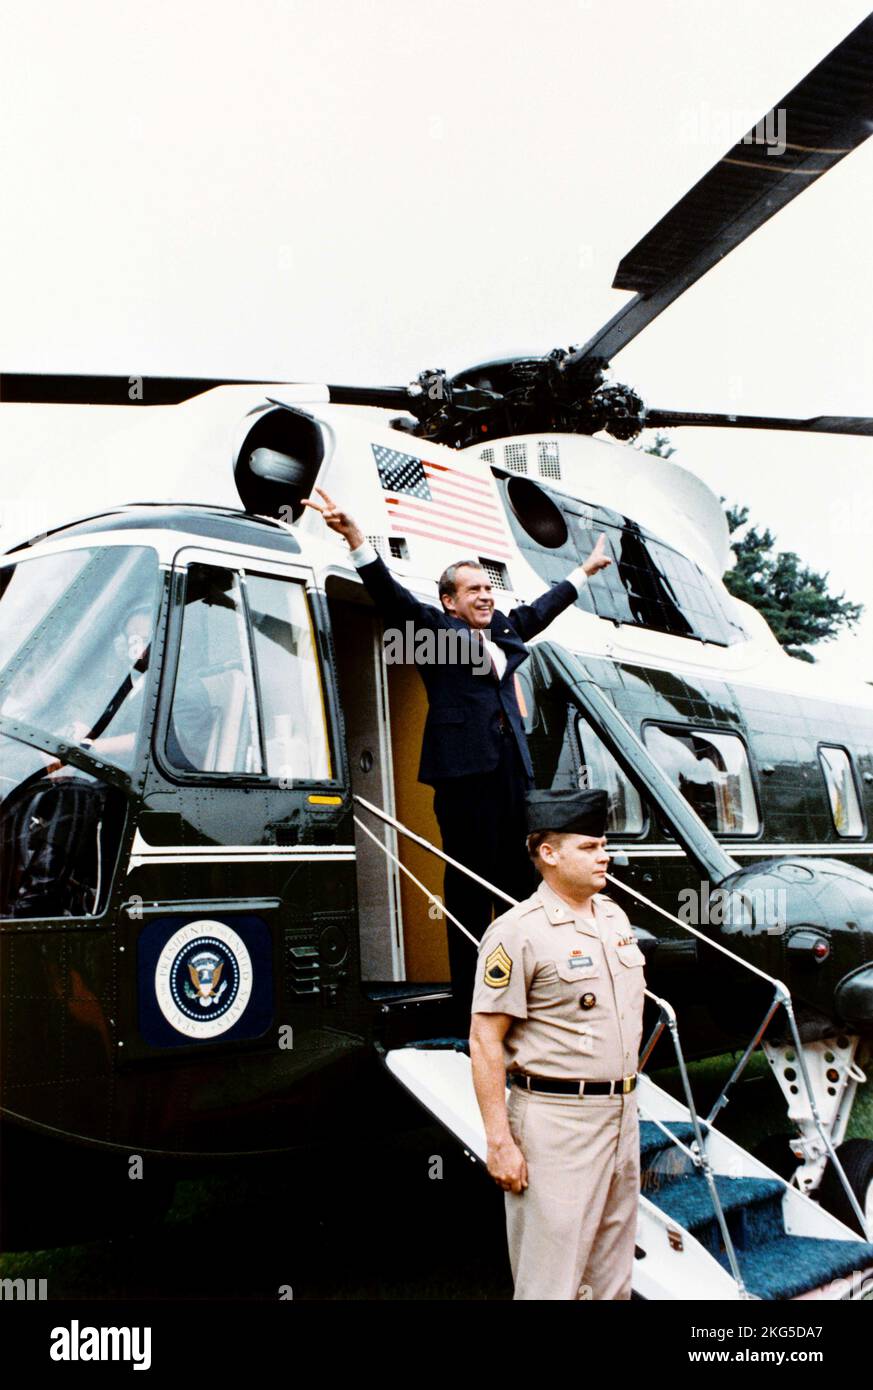 Richard Nixon's resignation and farewell Ollie Atkins Oliver F. Atkins' photo of Nixon leaving the White House on Marine One shortly before his resignation became effective, August 9, 1974 Stock Photo